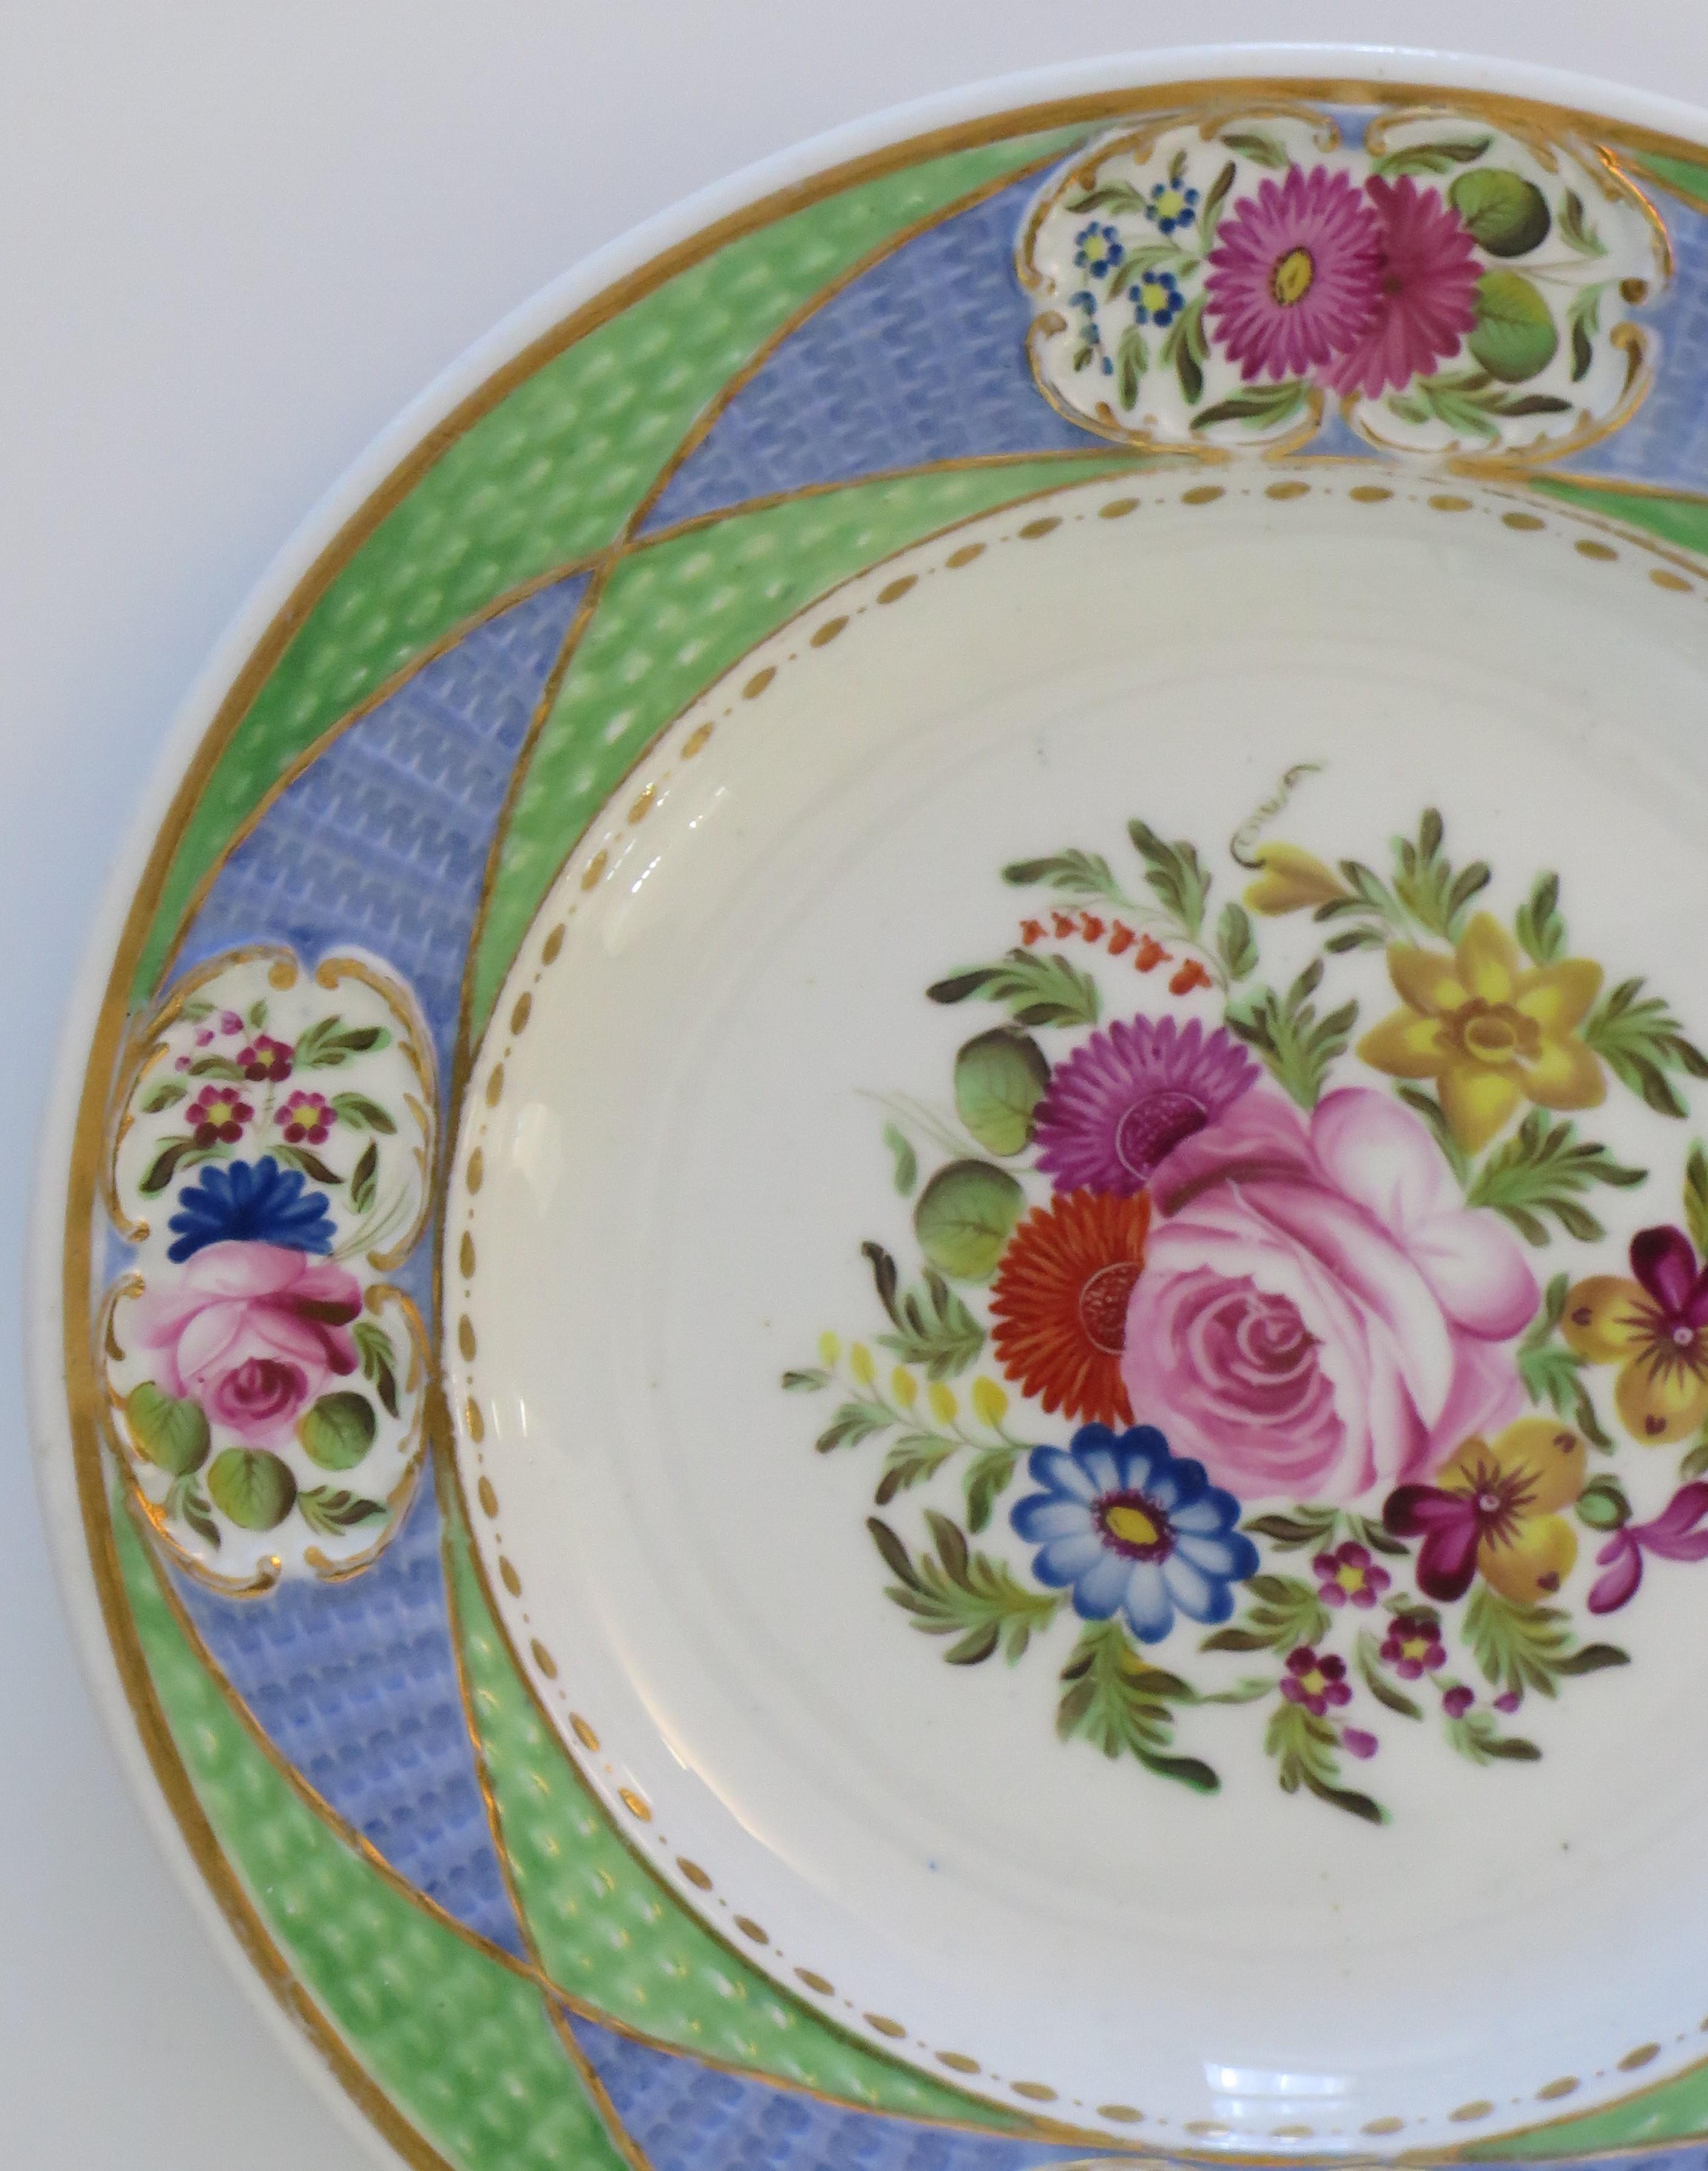 Glazed Fine Newhall Porcelain Plate Hand Painted Pattern 2050, Georgian circa 1820 For Sale